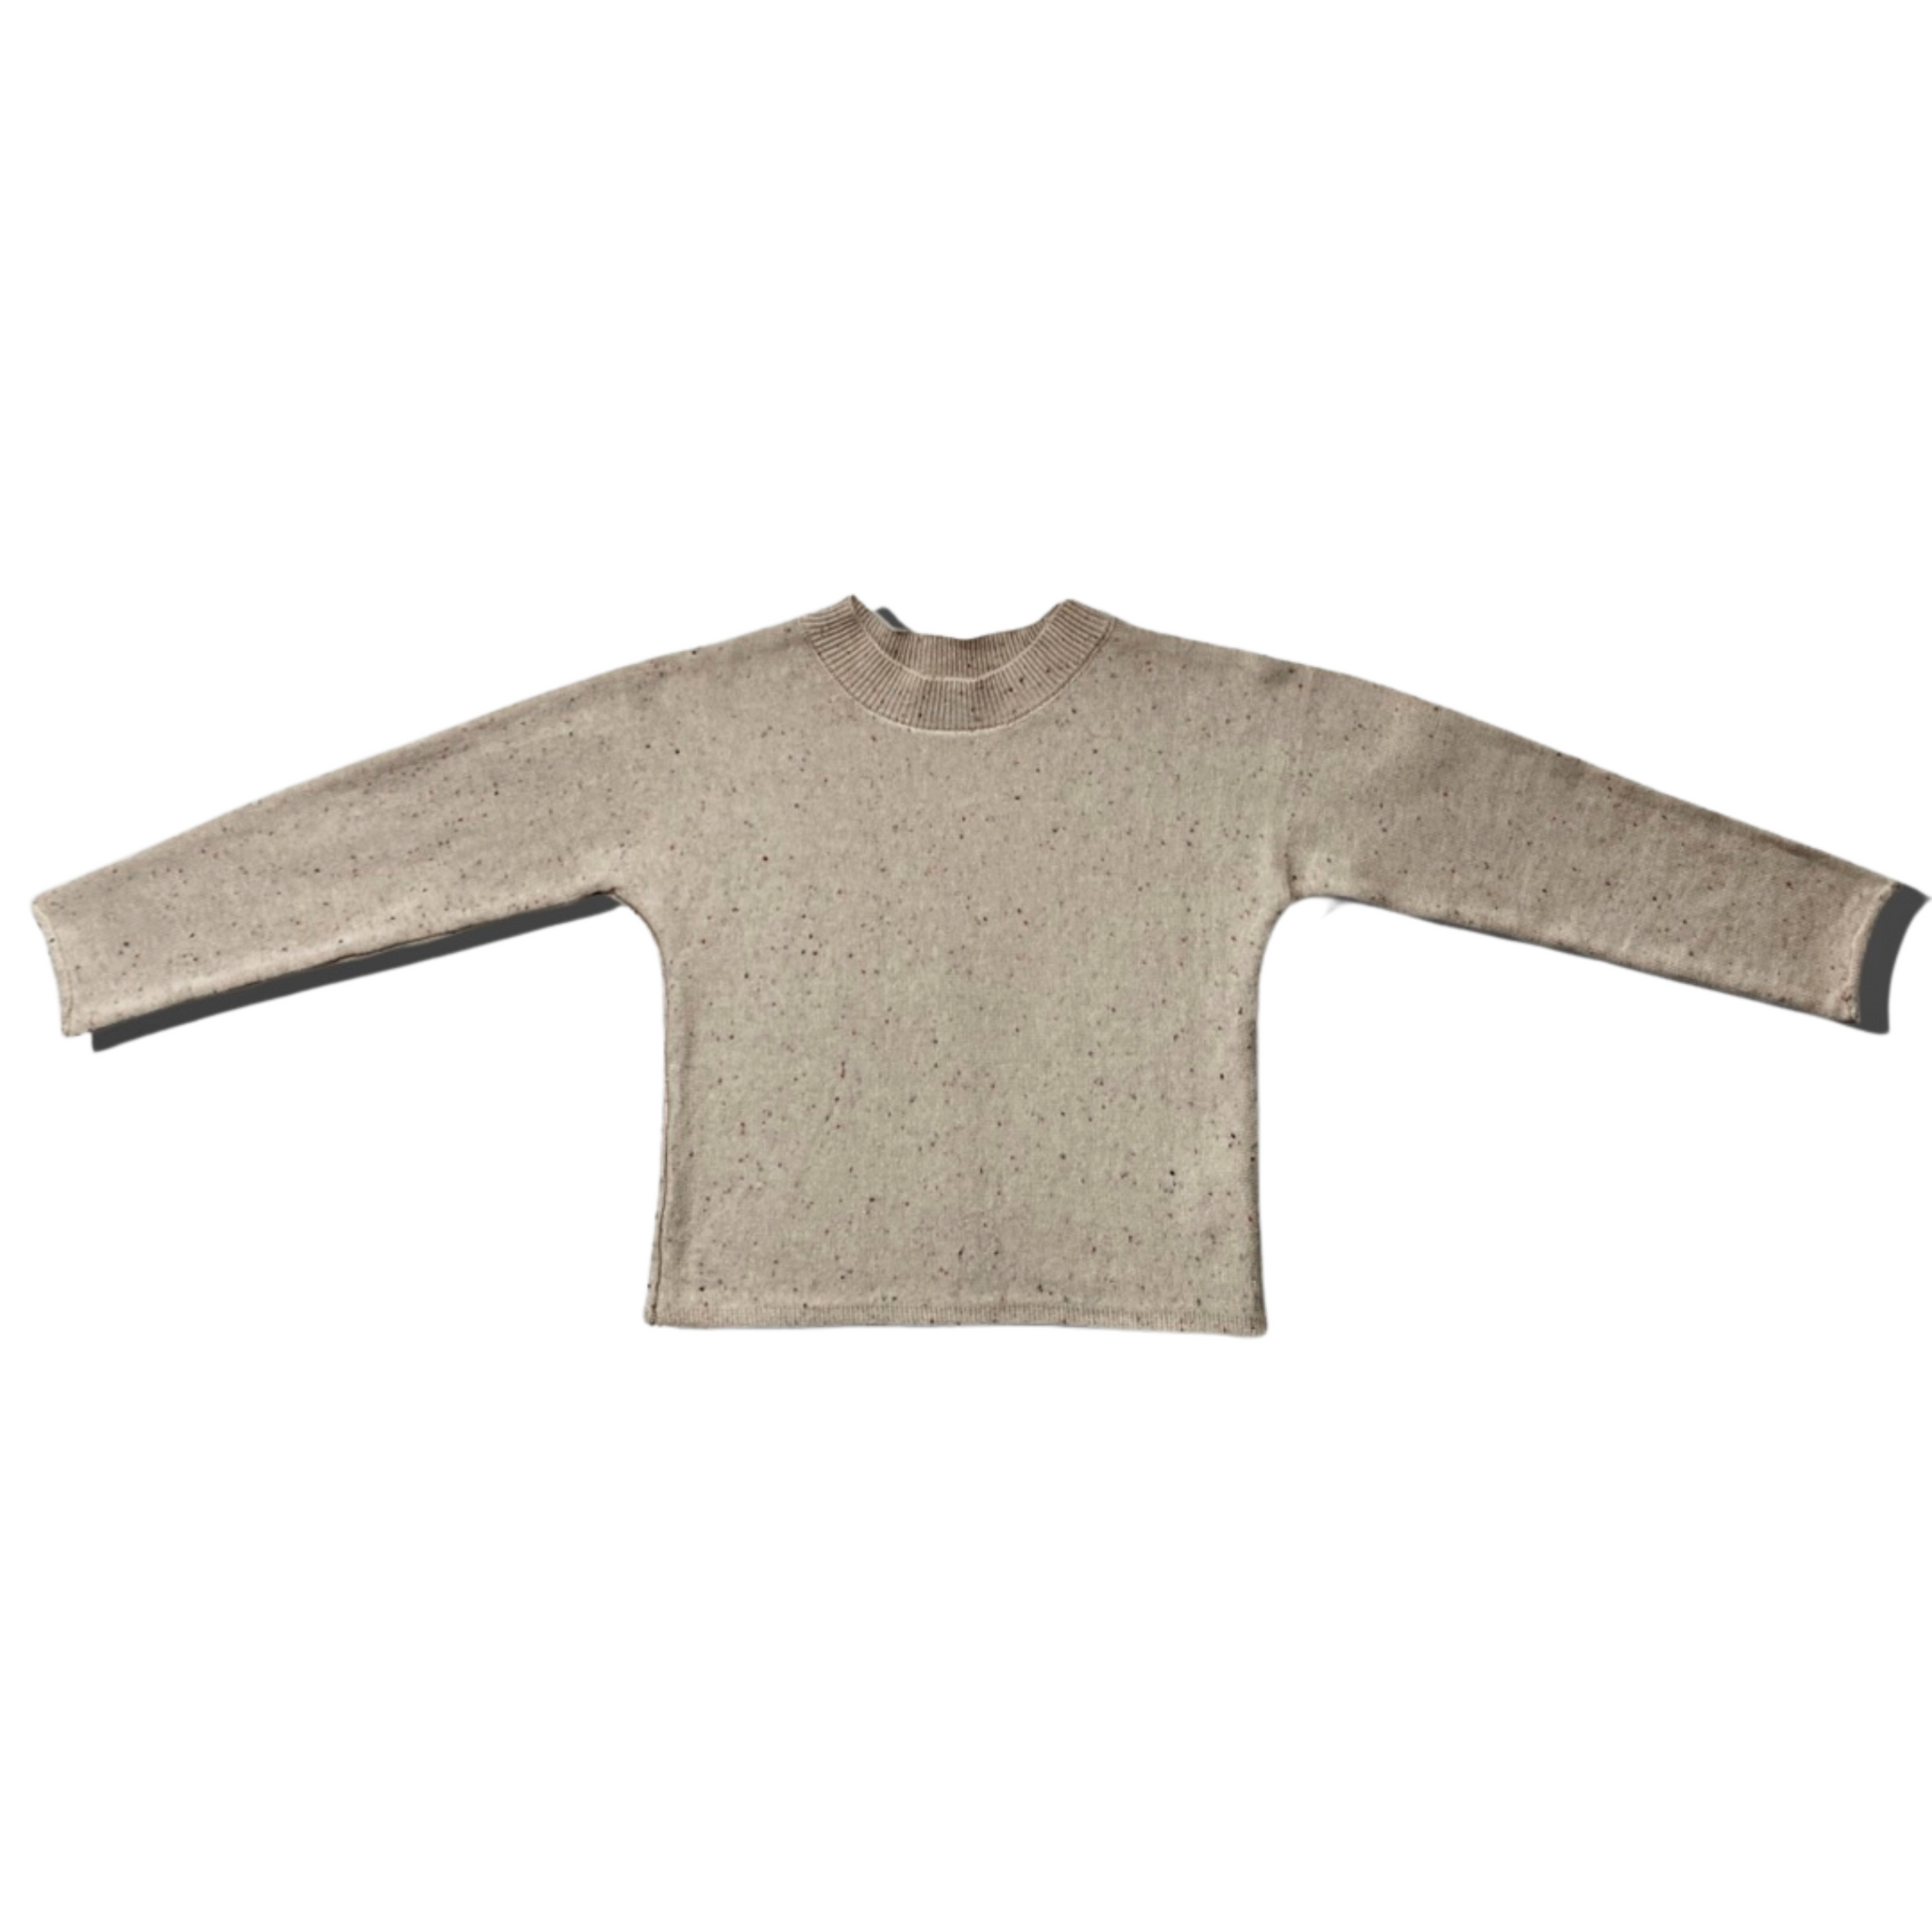 THE KNIT PULLOVER